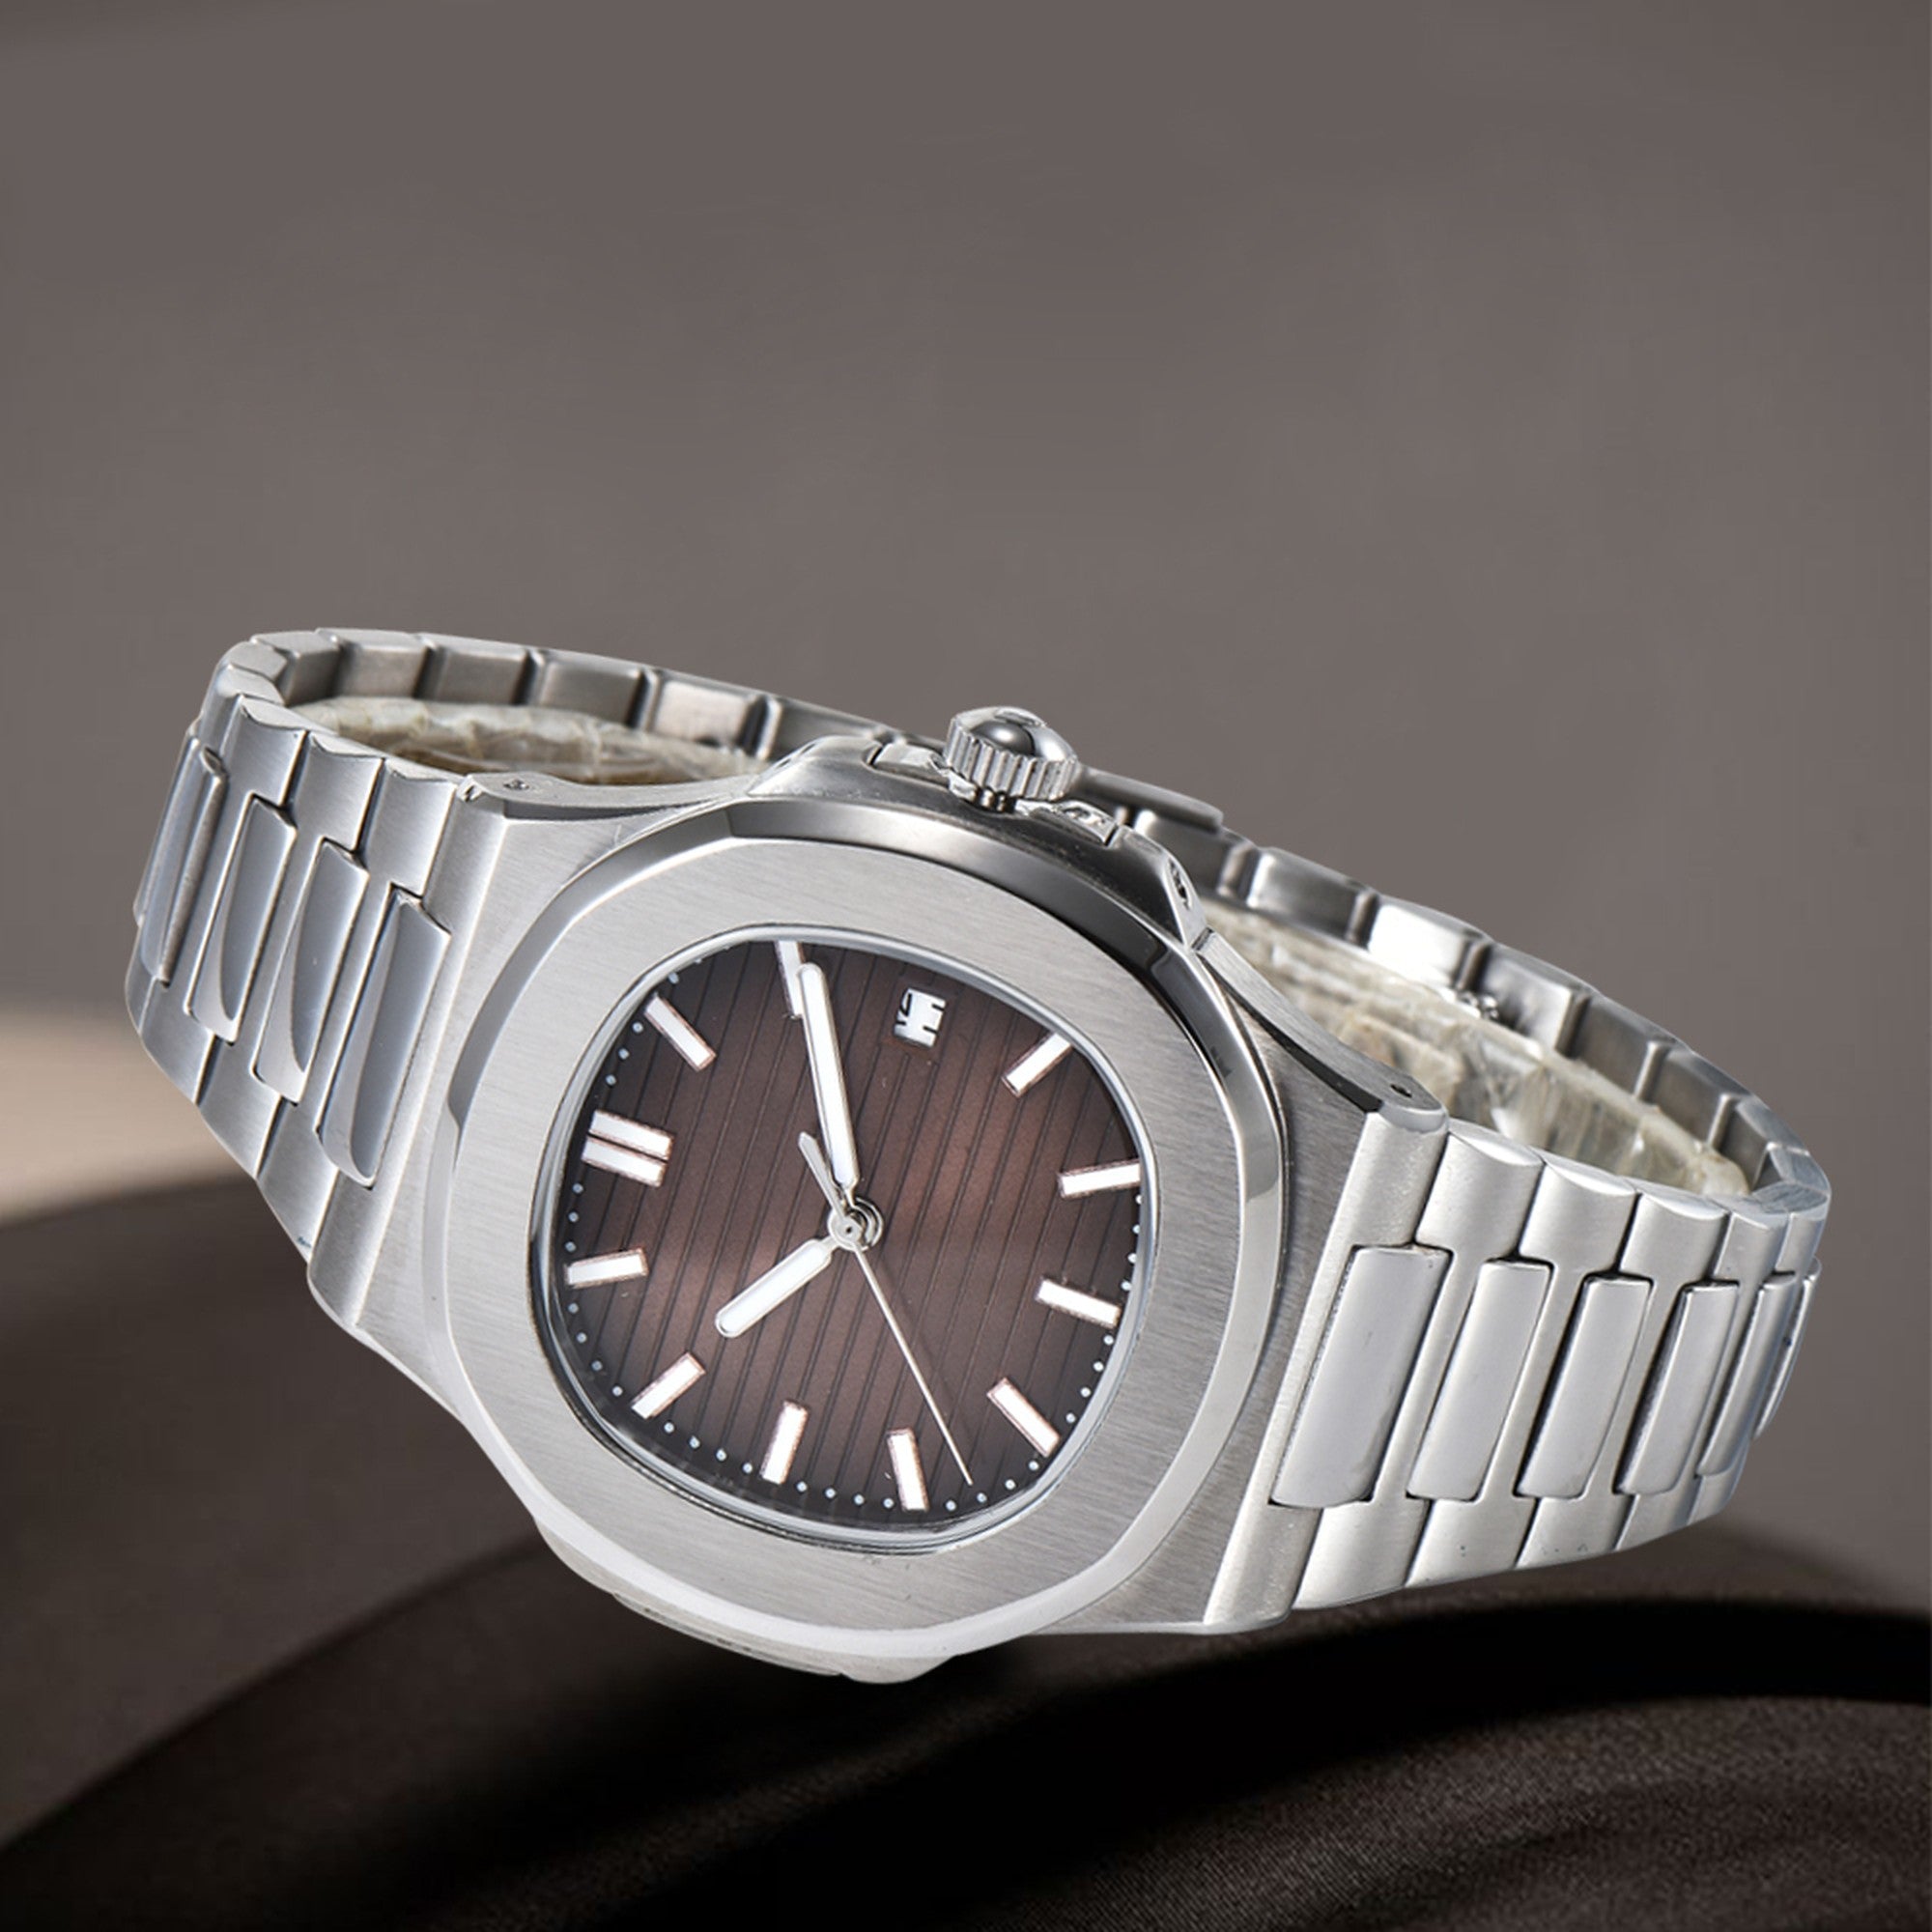 Nautilus Mechanical Men's Automatic: Stainless Steel Watches / Navy / Suits, Luxury Popular Brands / Fashion PP89